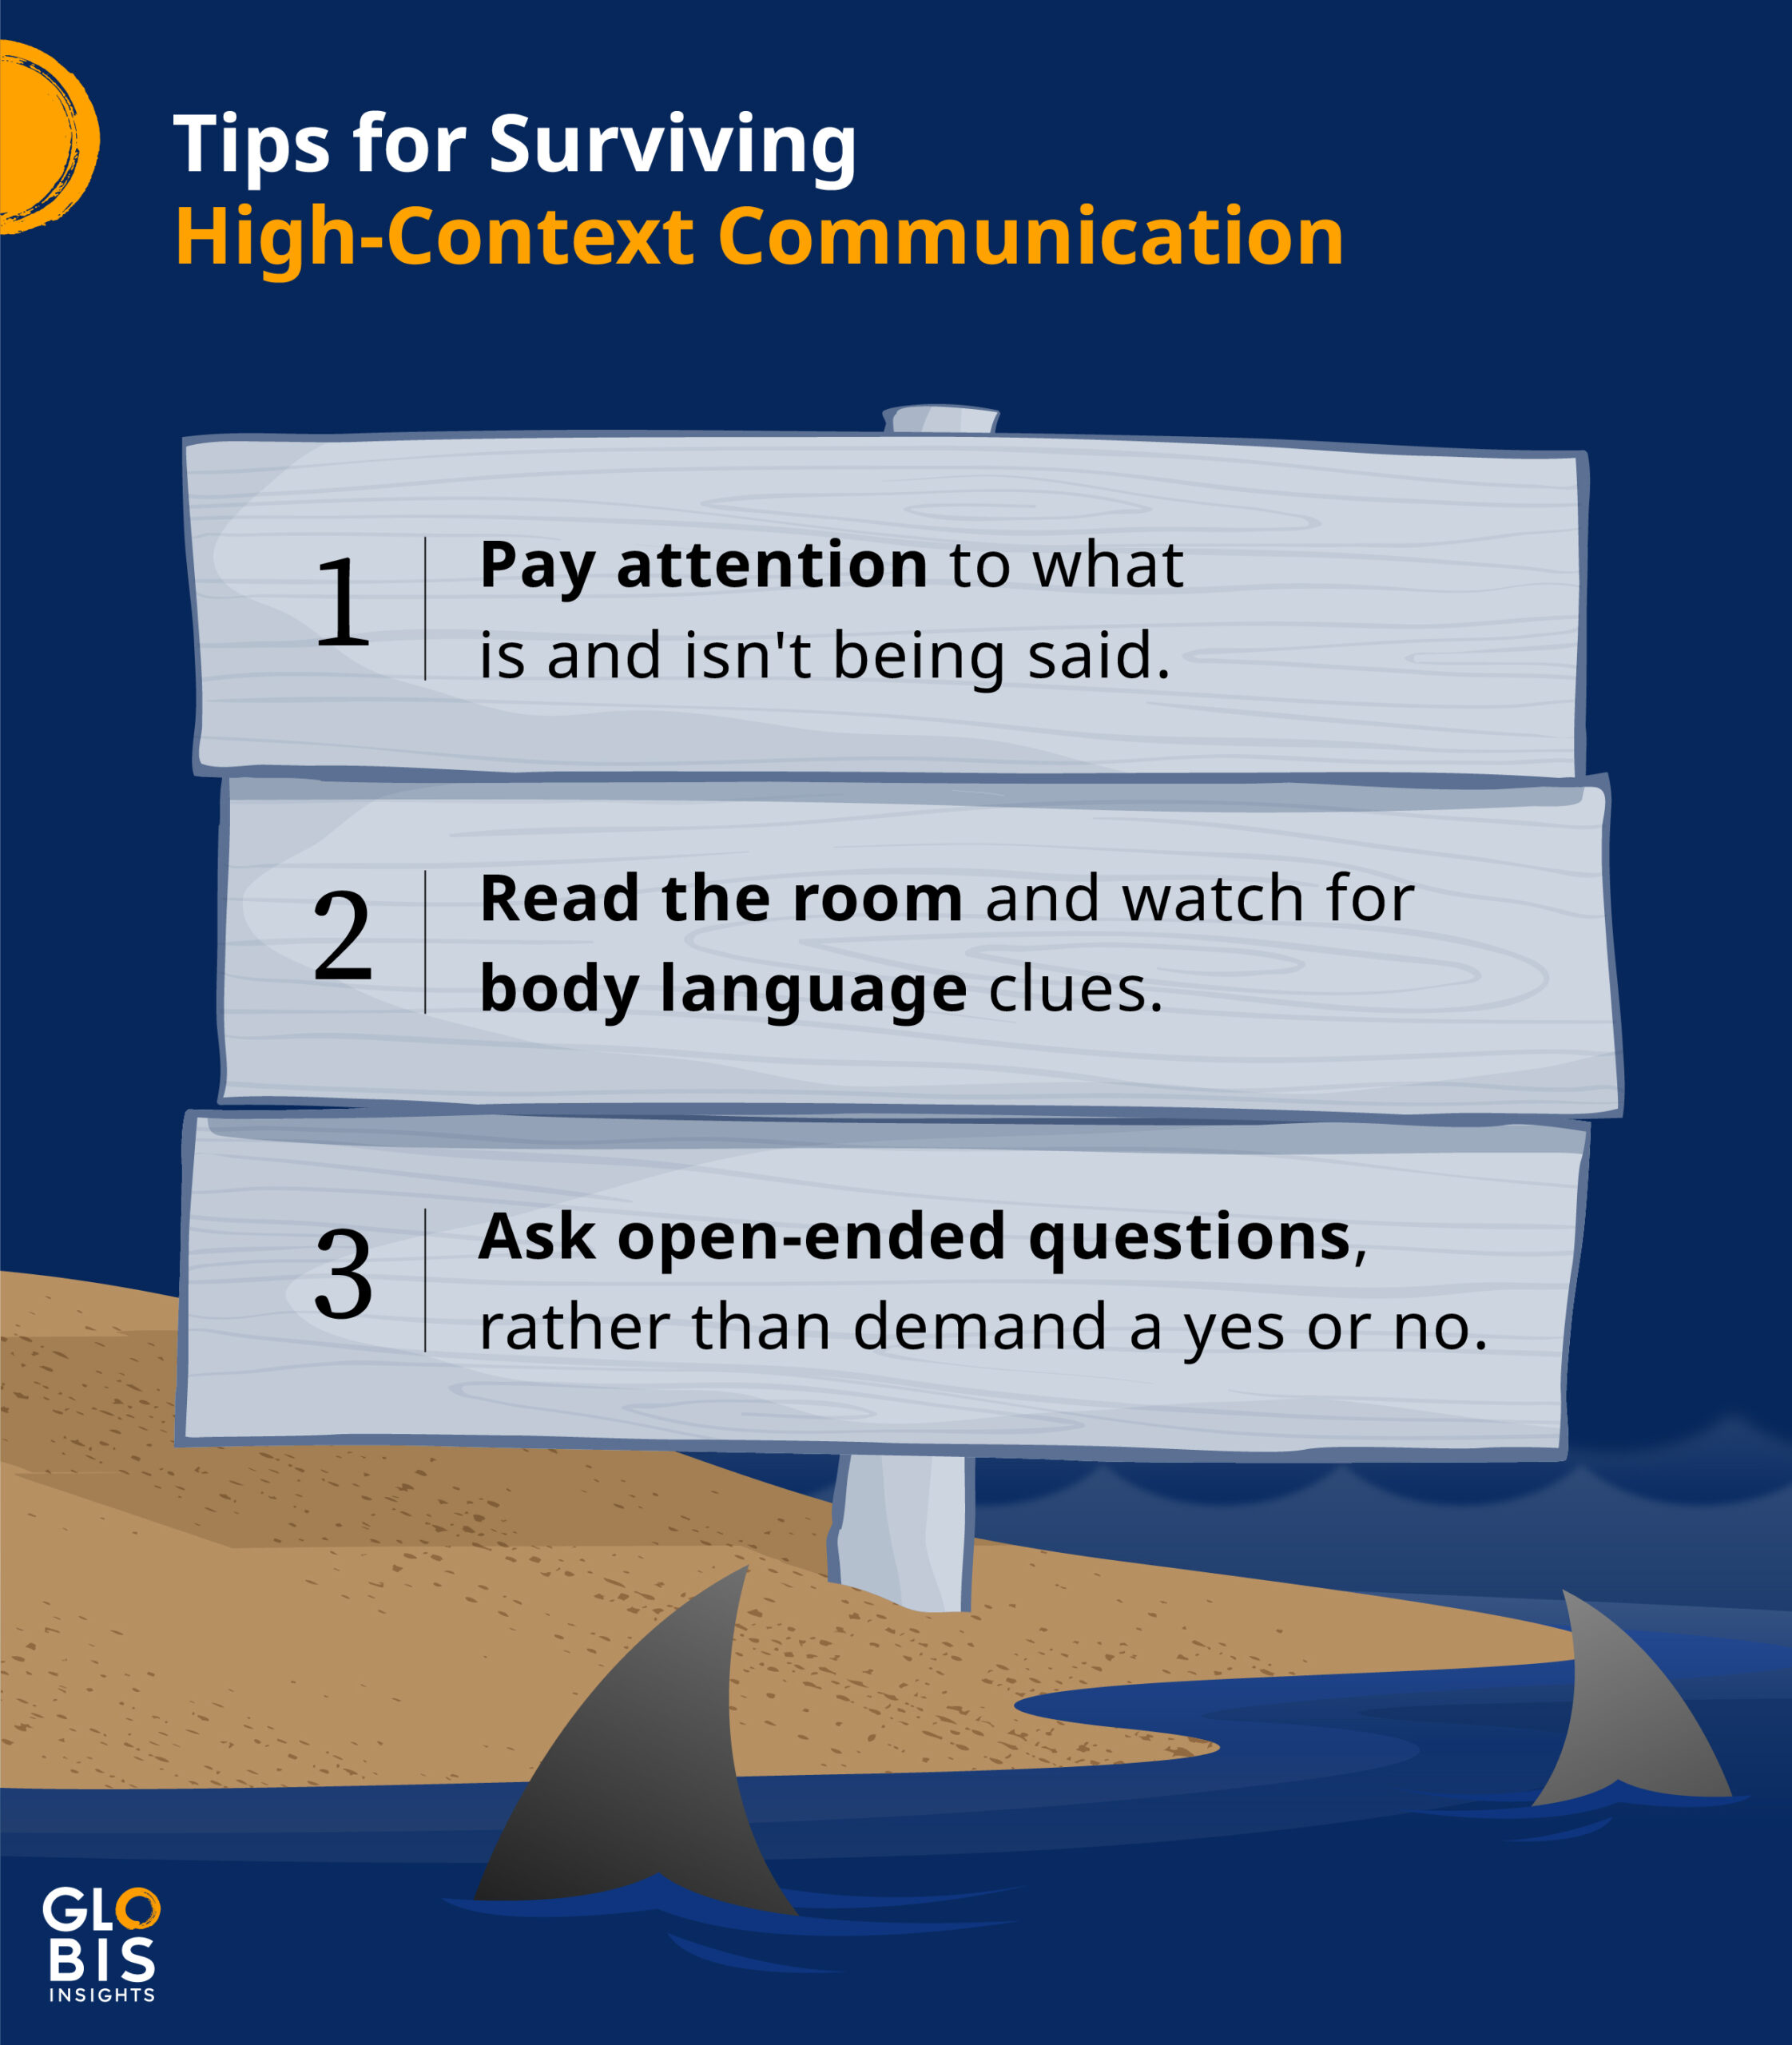 Infographic listing tips for high-context communication